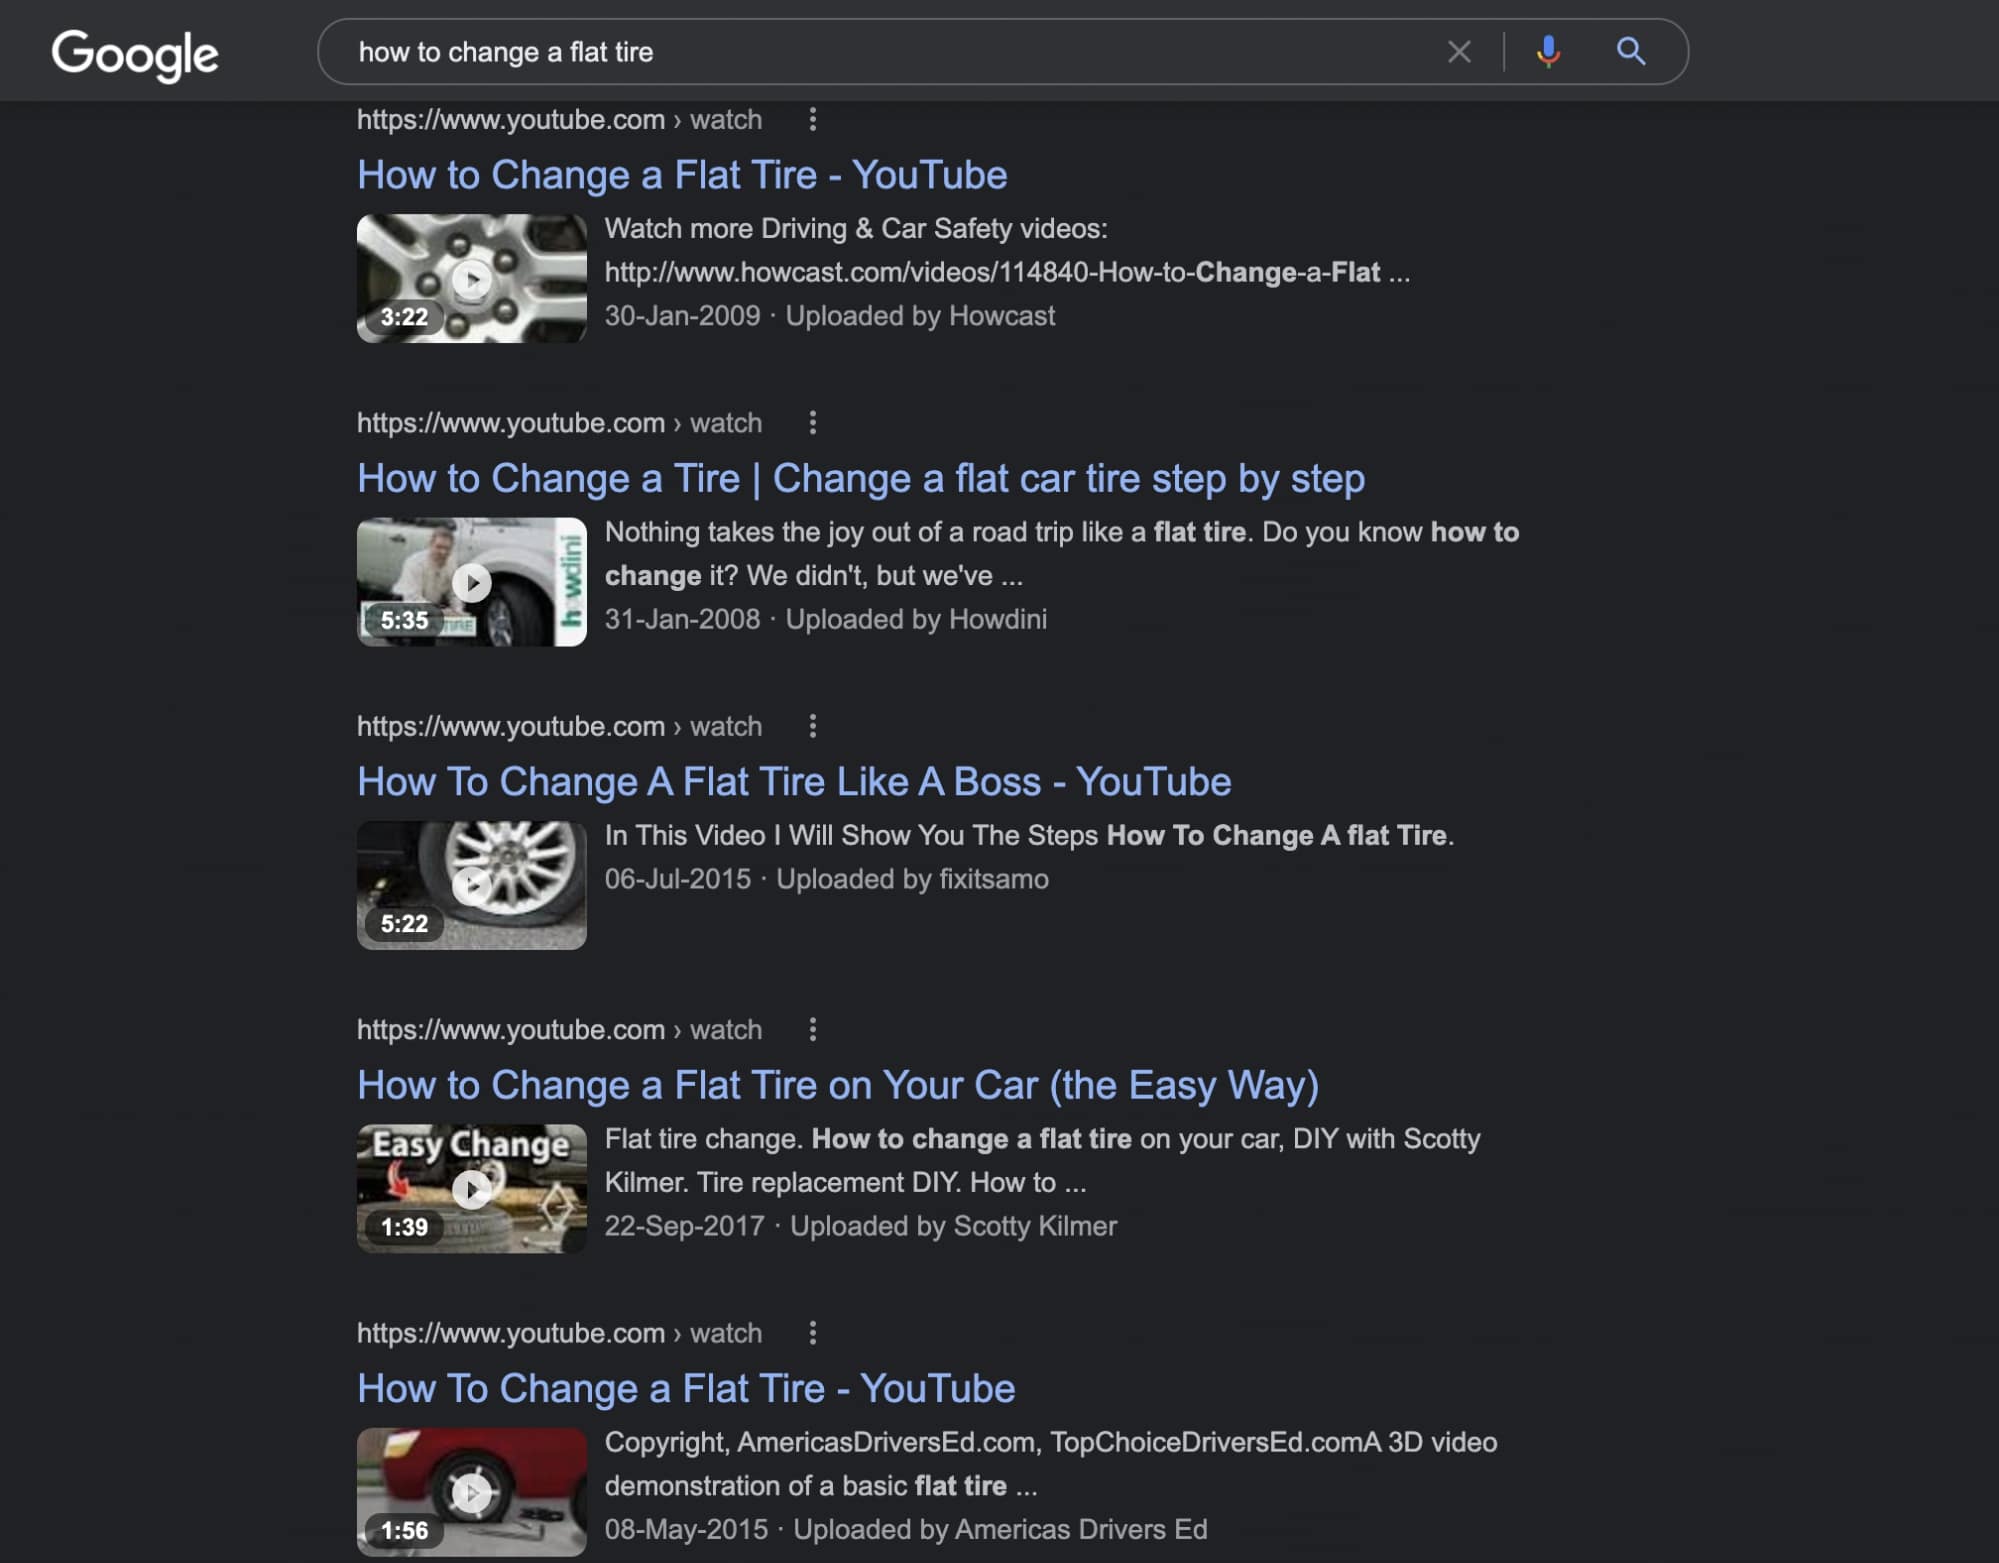 Video based SERP for the keyword "how to change a tire"